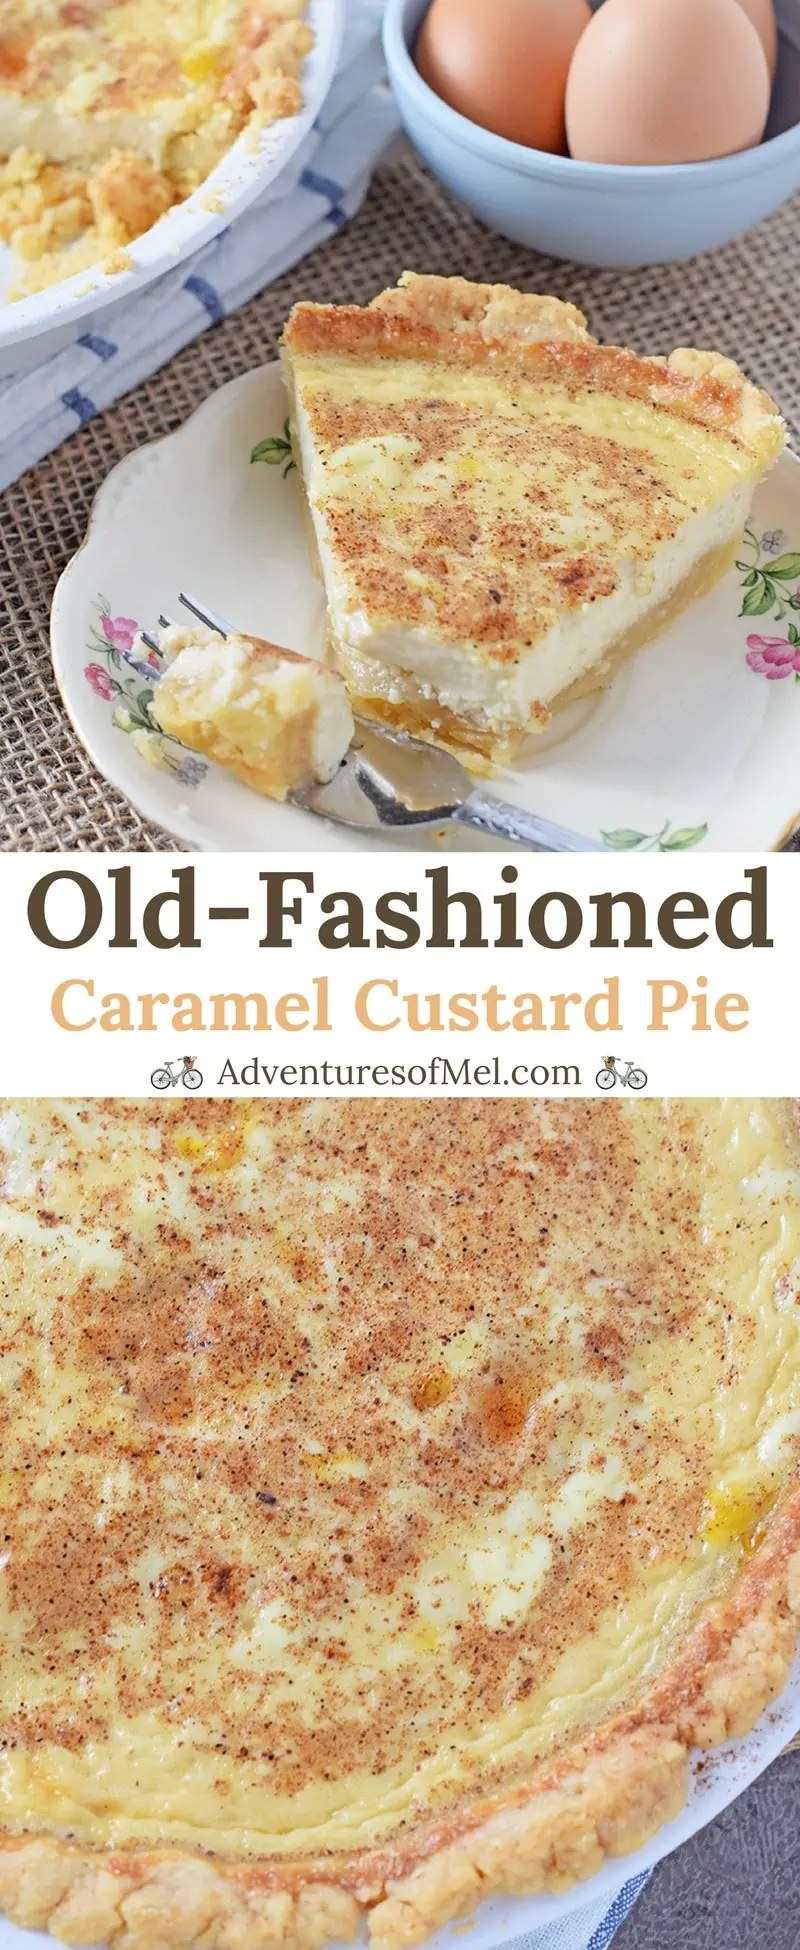 Caramel Custard Pie, made with an easy shortcut pie crust and a brown sugar caramel twist. Delicious dessert and a family favorite recipe!